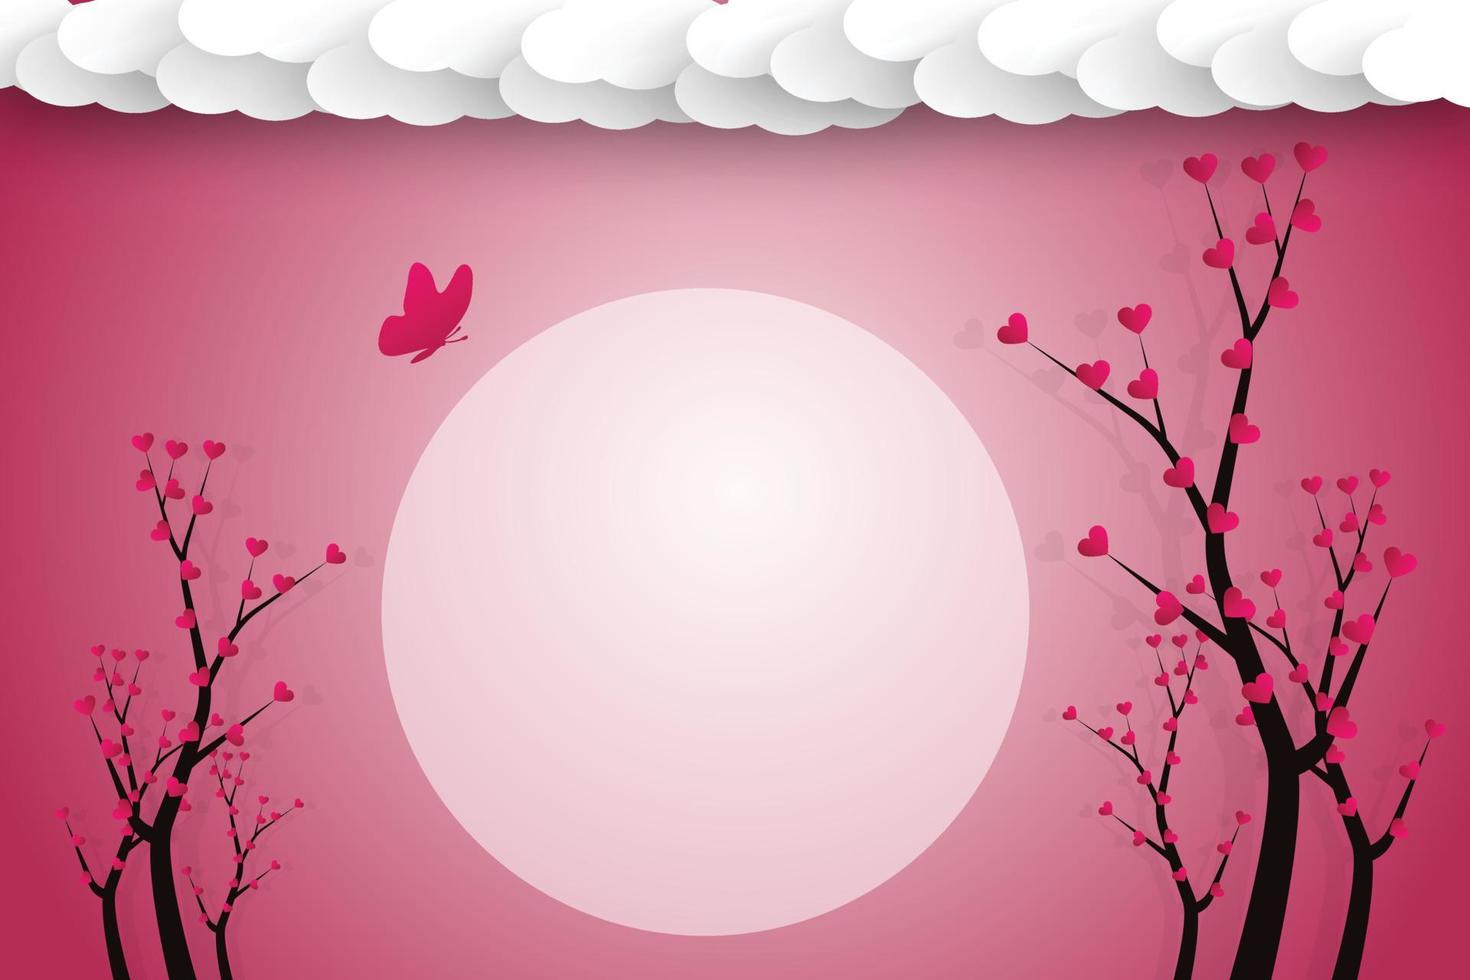 Happy valentines day background with love tree. Valentine's day illustration with a heart love tree on a pink background. vector